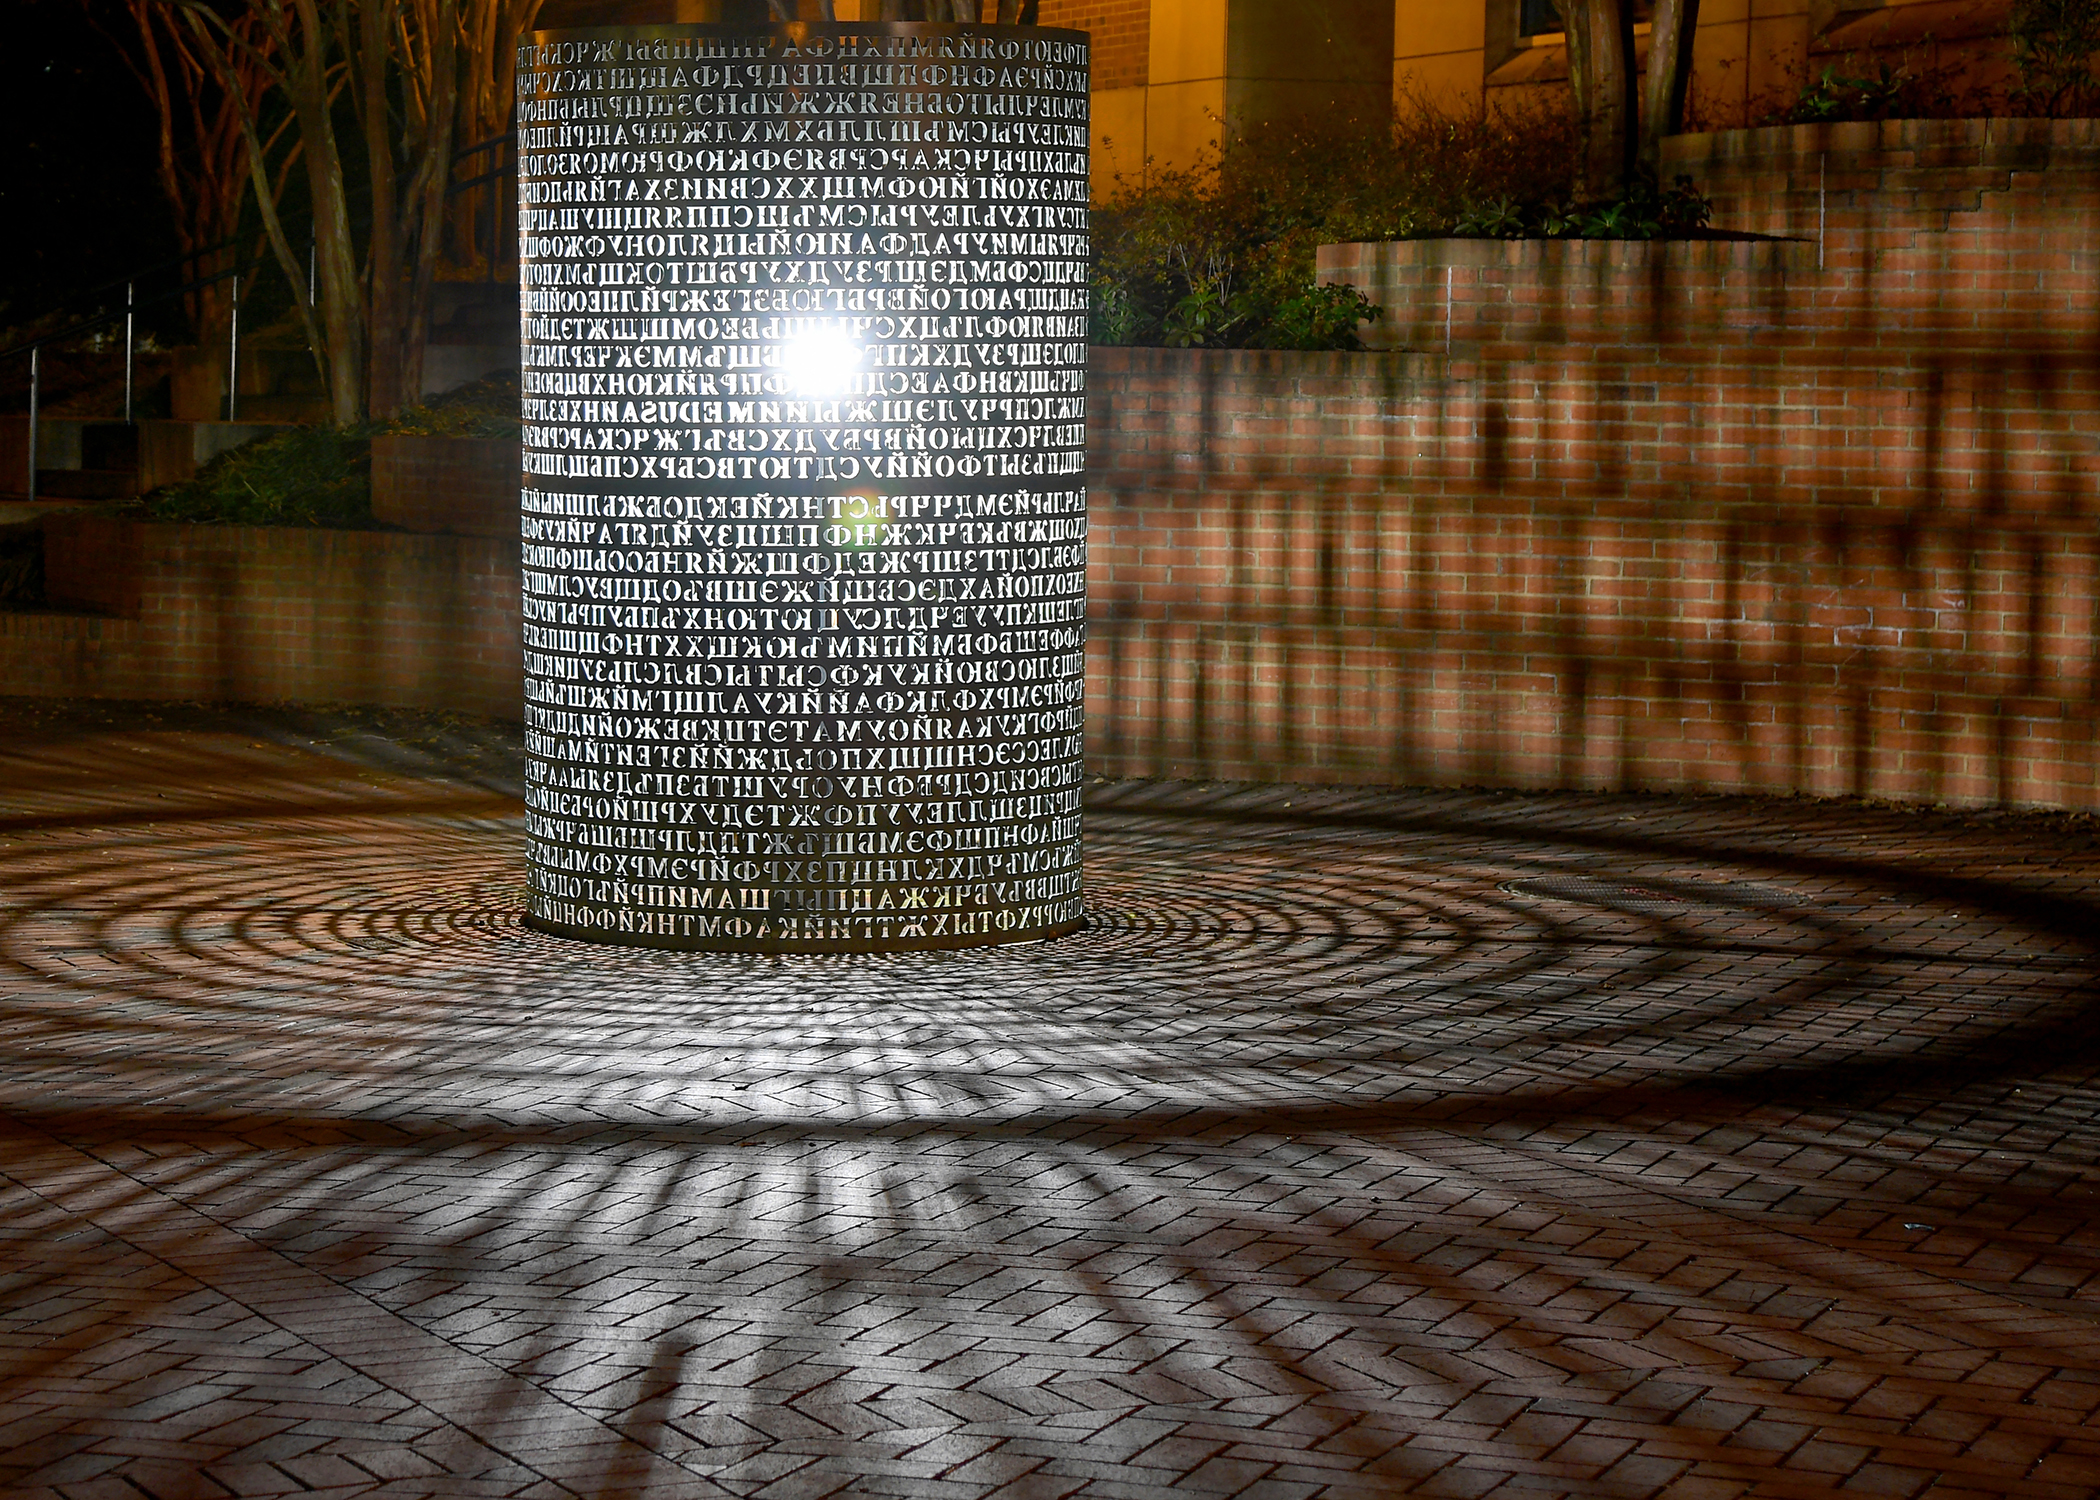 Bronze, cylindrical sculpture with Cyrillic letters cut out of the surface. Sculpture is illuminated from within at nighttime